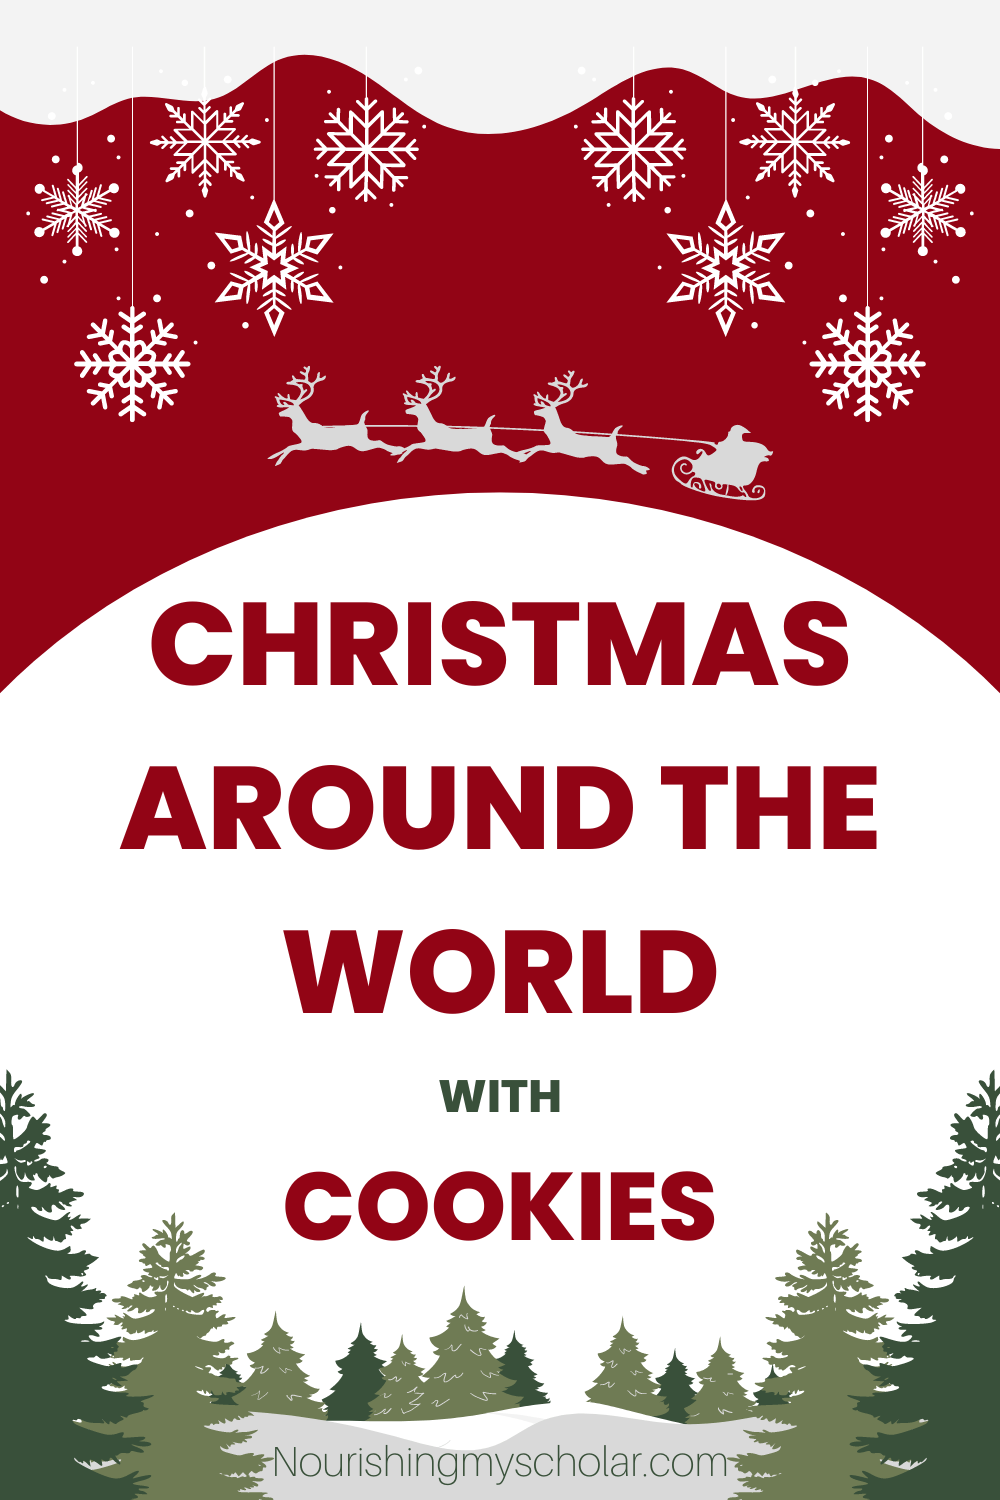 Christmas Around the World with Cookies: Christmas around the world with cookies is a tasty and fun way for children to explore cultures and traditions from around the globe. #Christmas #Christmasschool #homeschool #Christmasaroundtheworld #kidsChristmasactivity